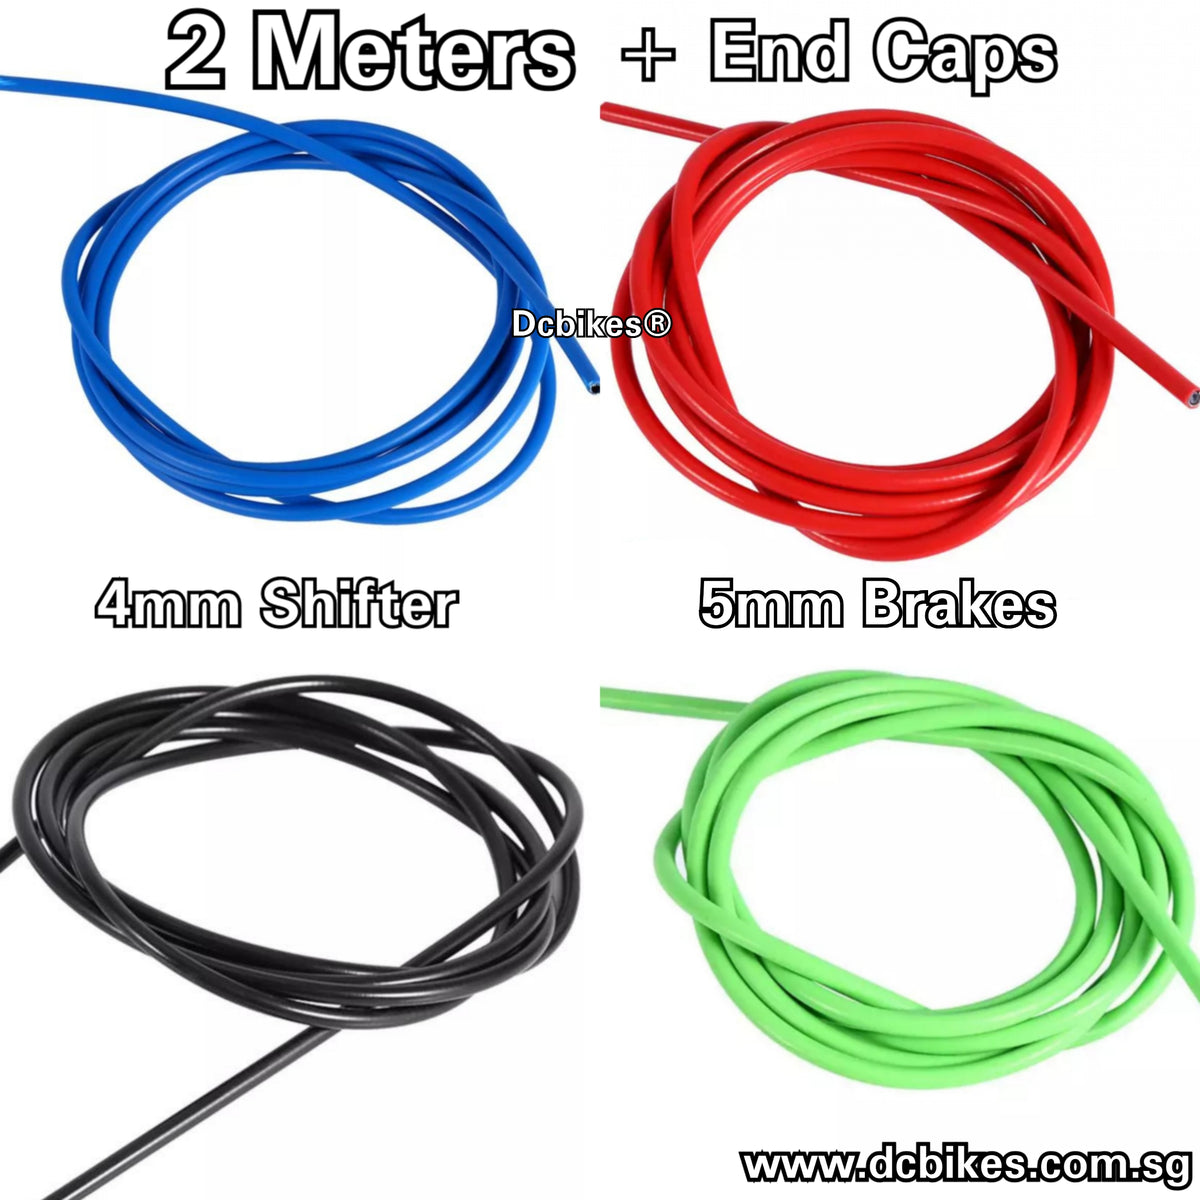 Spiral Silicone Rubber Bike Frame Protection Cable Outer Brake